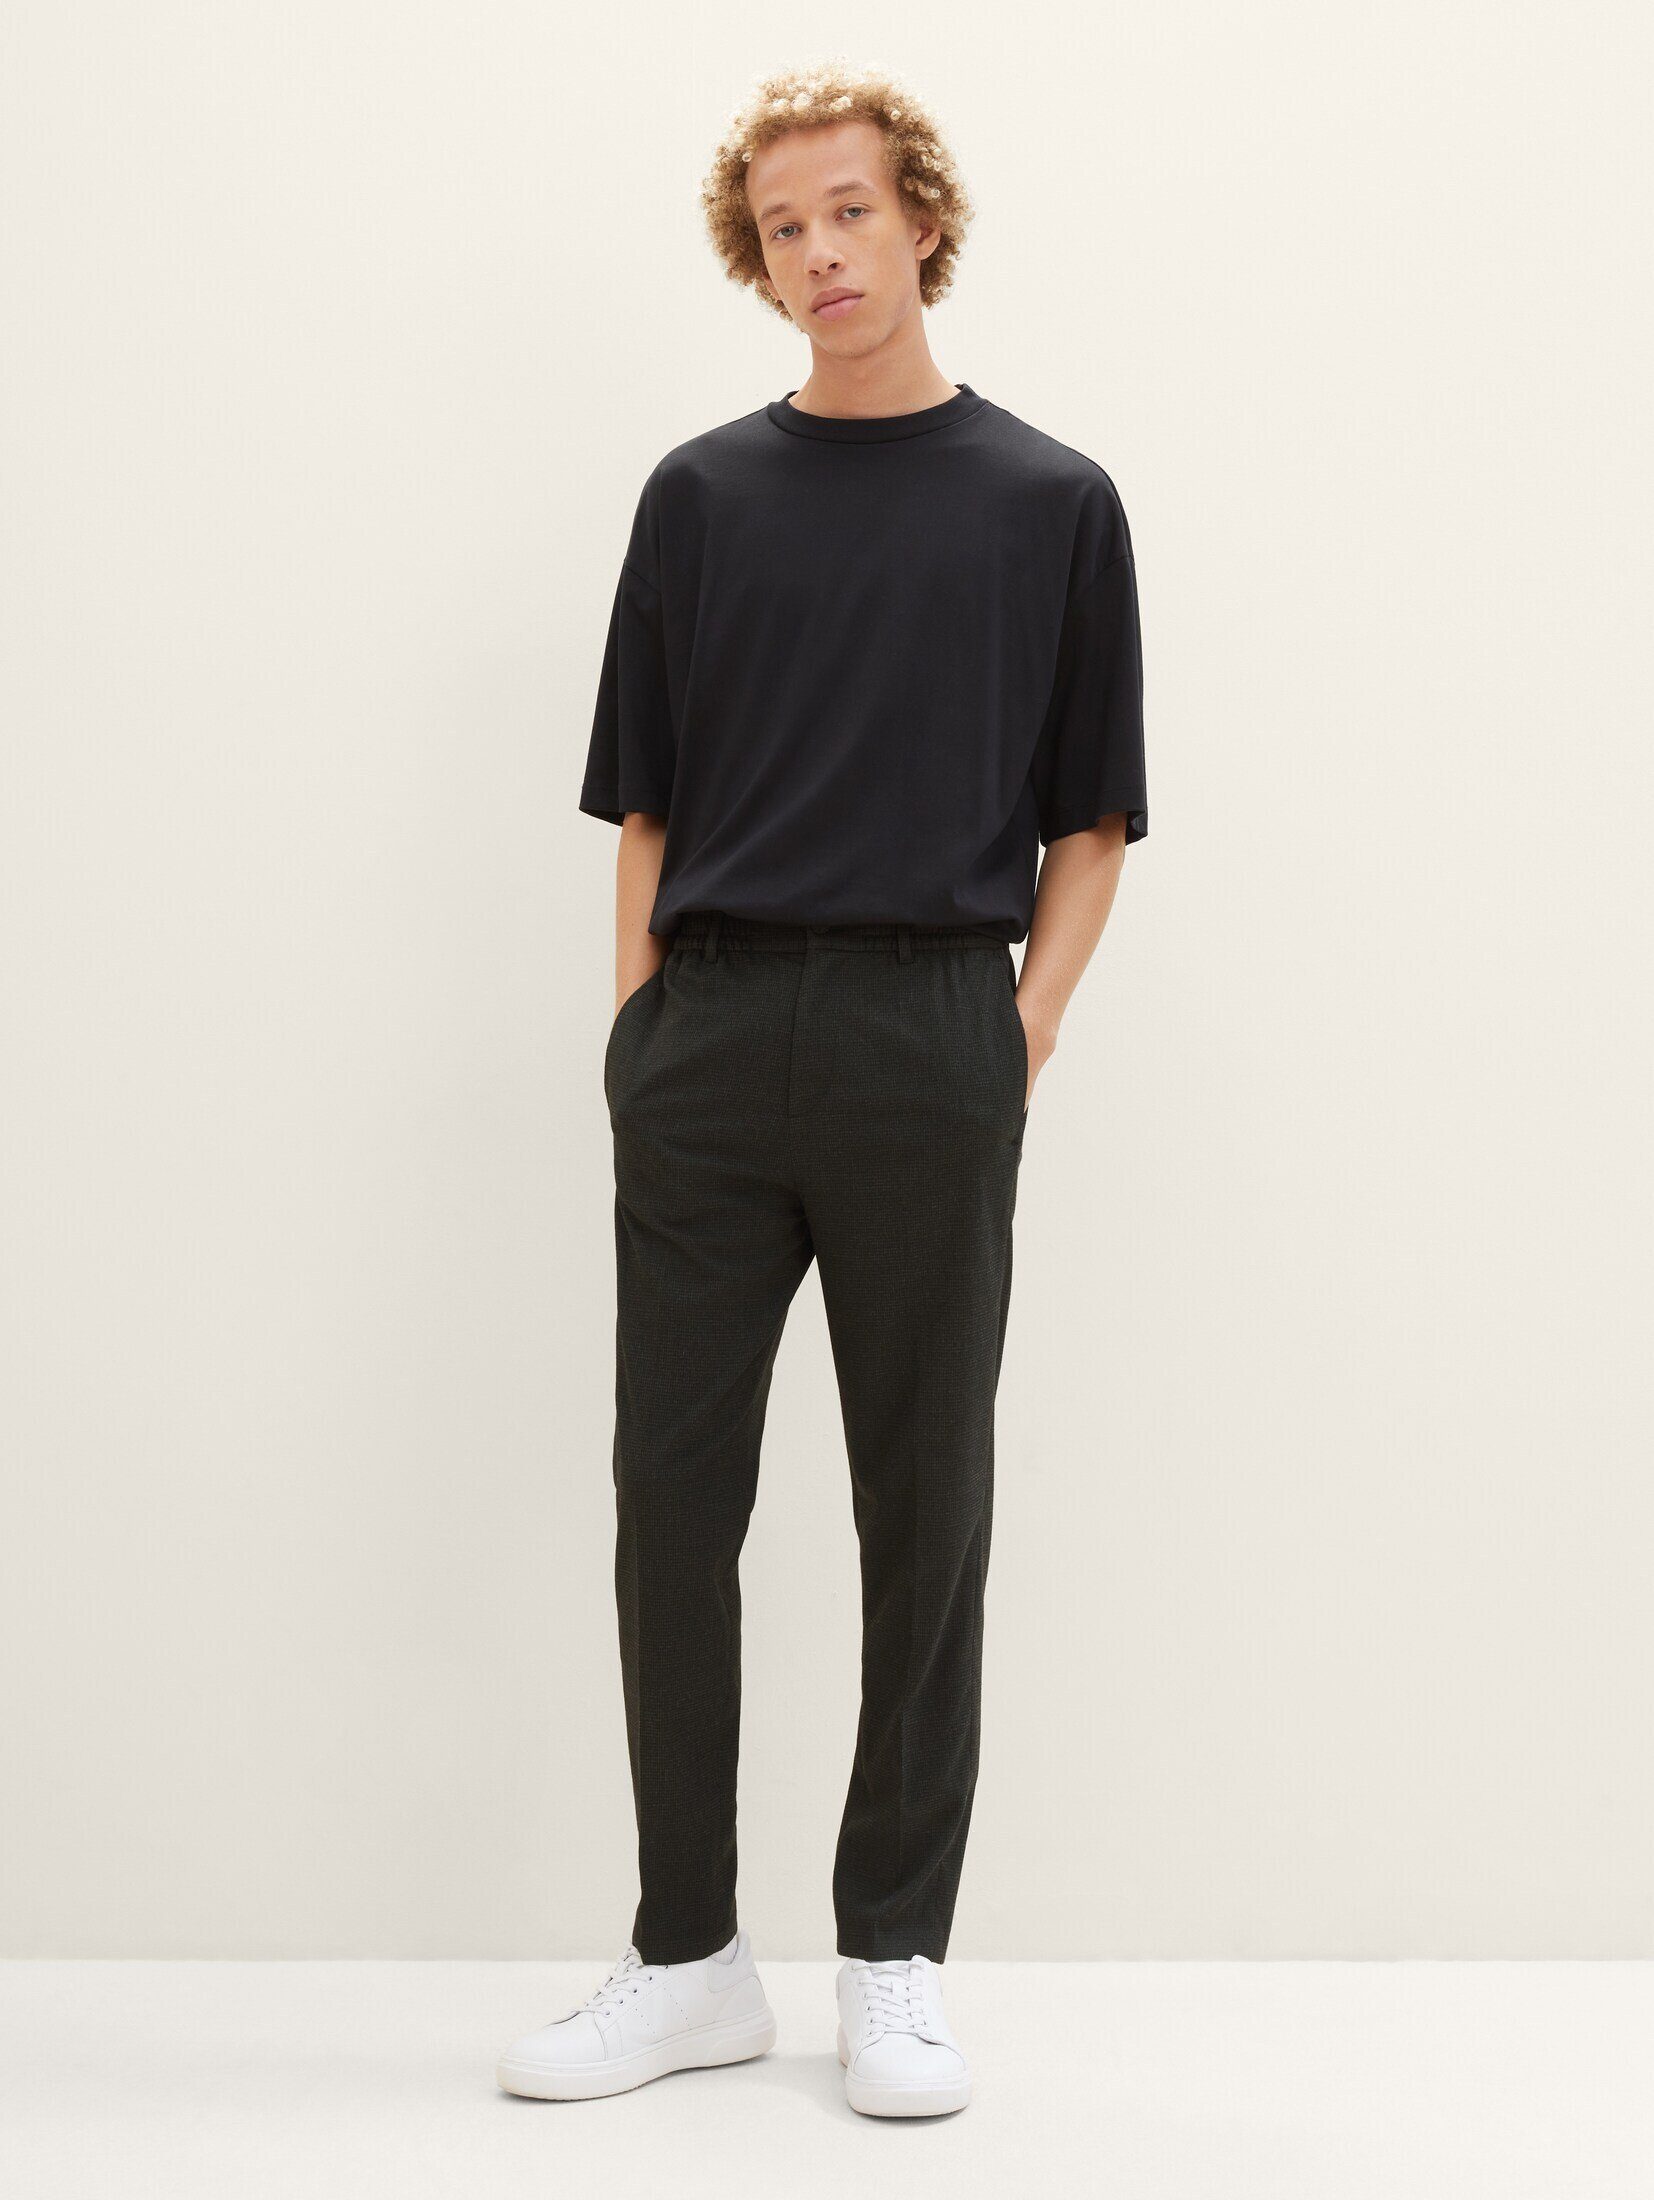 TOM TAILOR Denim Chinohose Relaxed Tapered Chino black houndstooth | Chinohosen